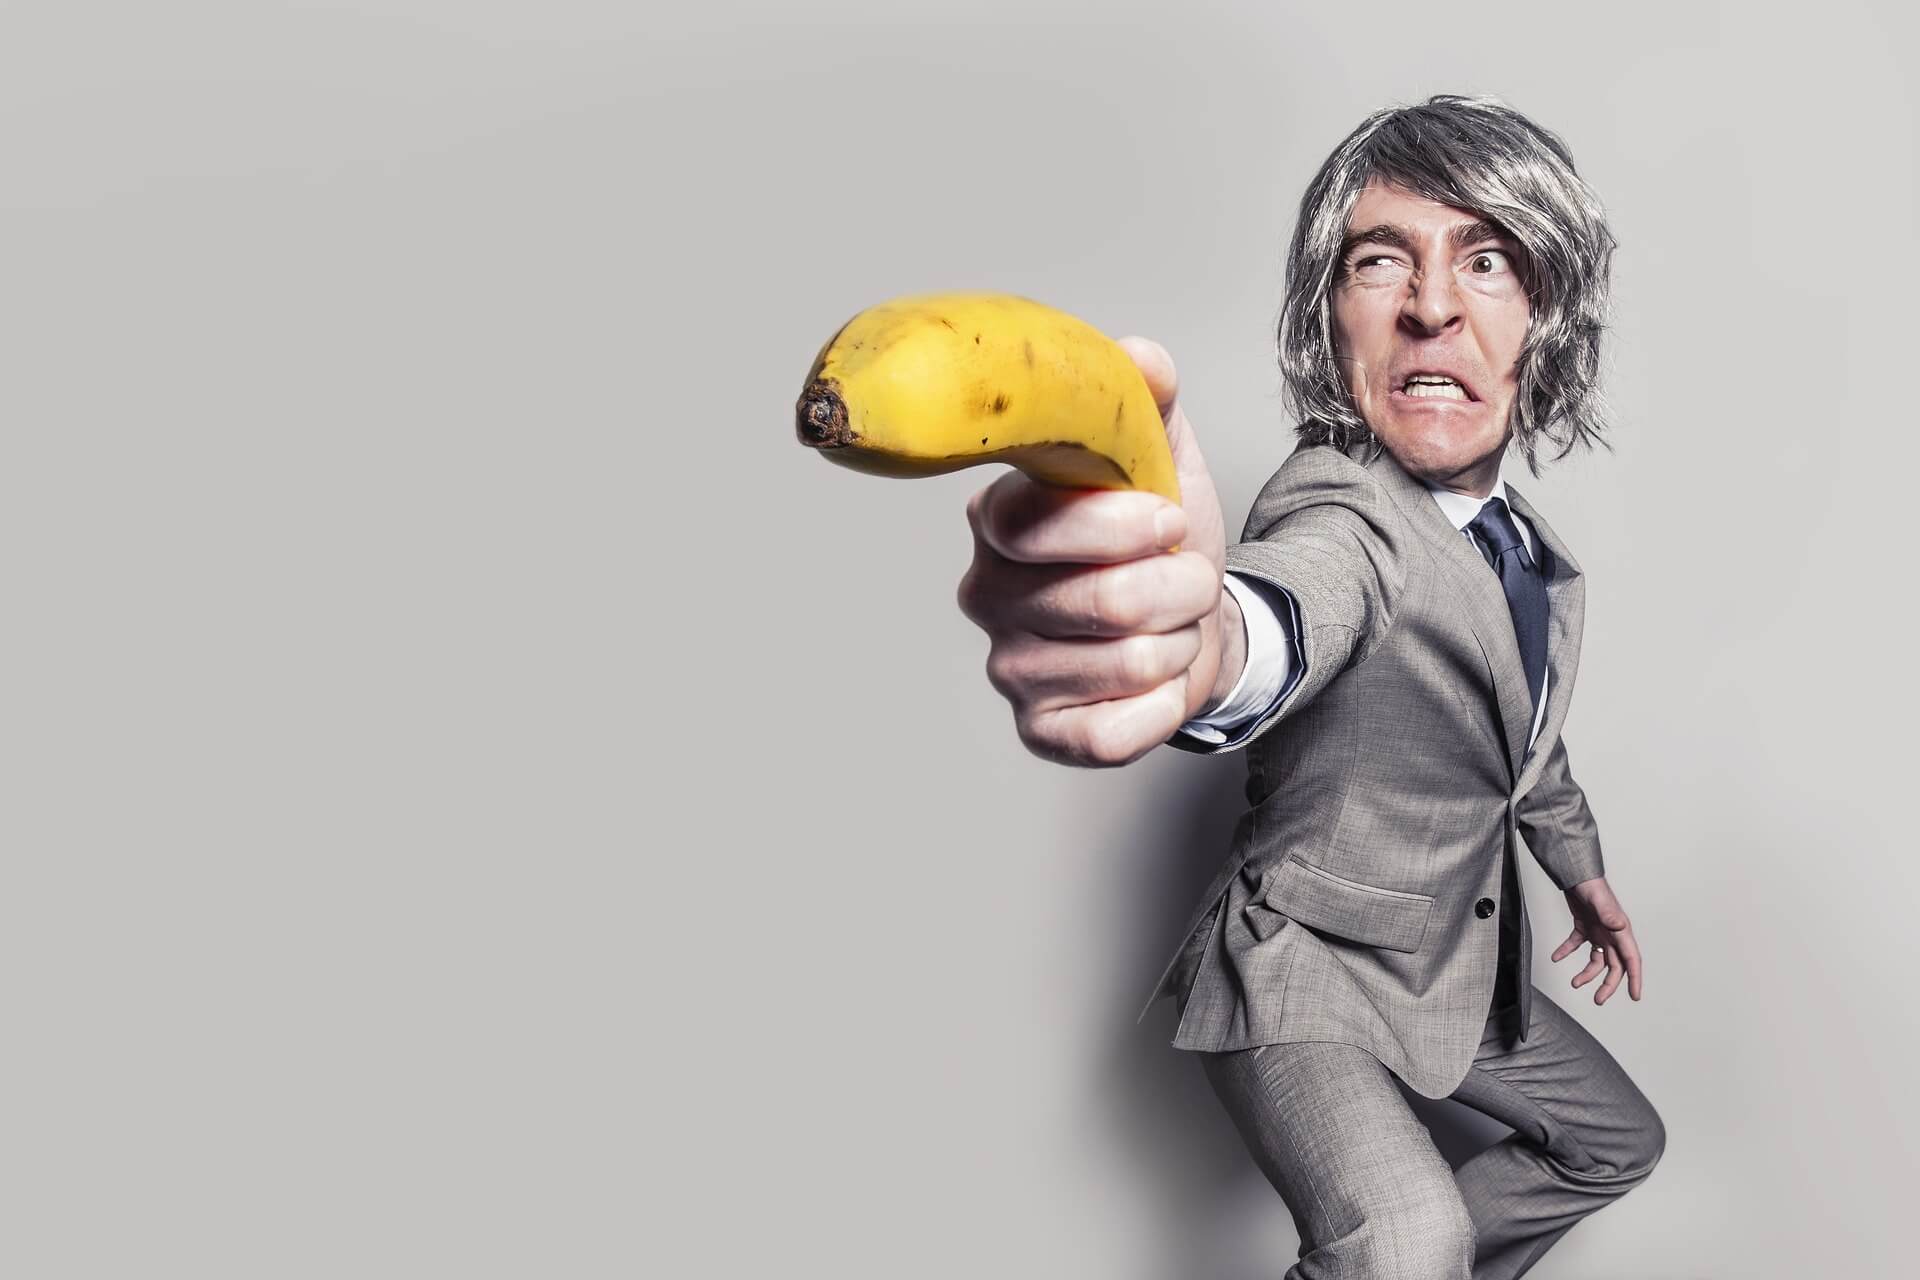 A teacher in a business suit wields a banana as a gun after burning out from going above and beyond.